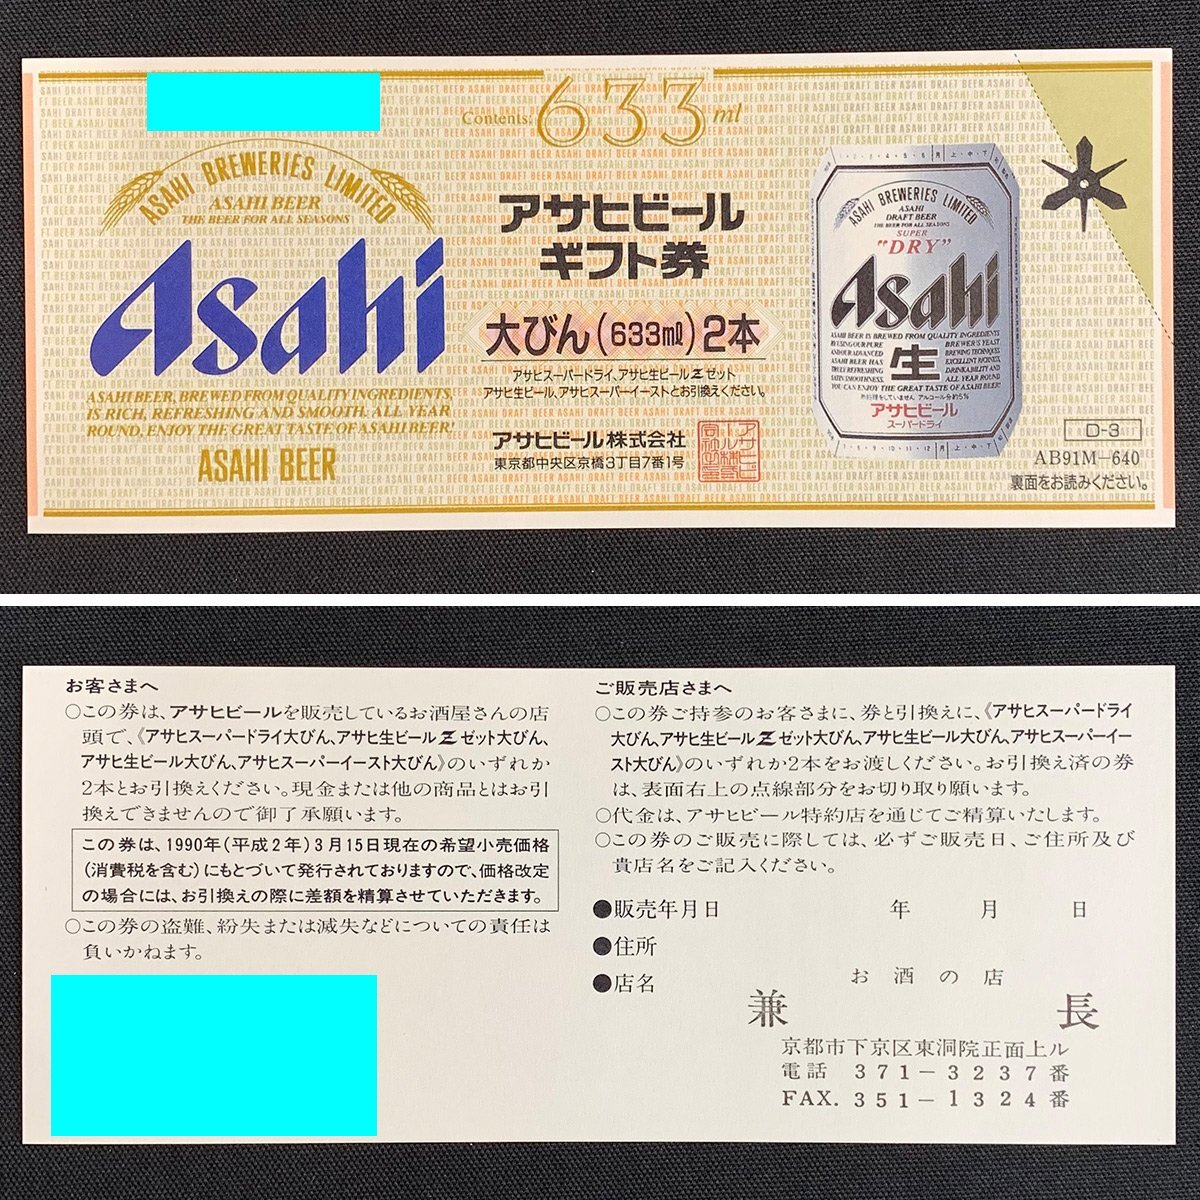 TH8y [ free shipping ] Asahi beer gift certificate ×7 sheets giraffe beer gift certificate ×2 sheets beer common ticket ×116 sheets total 125 sheets 63,490 jpy minute 